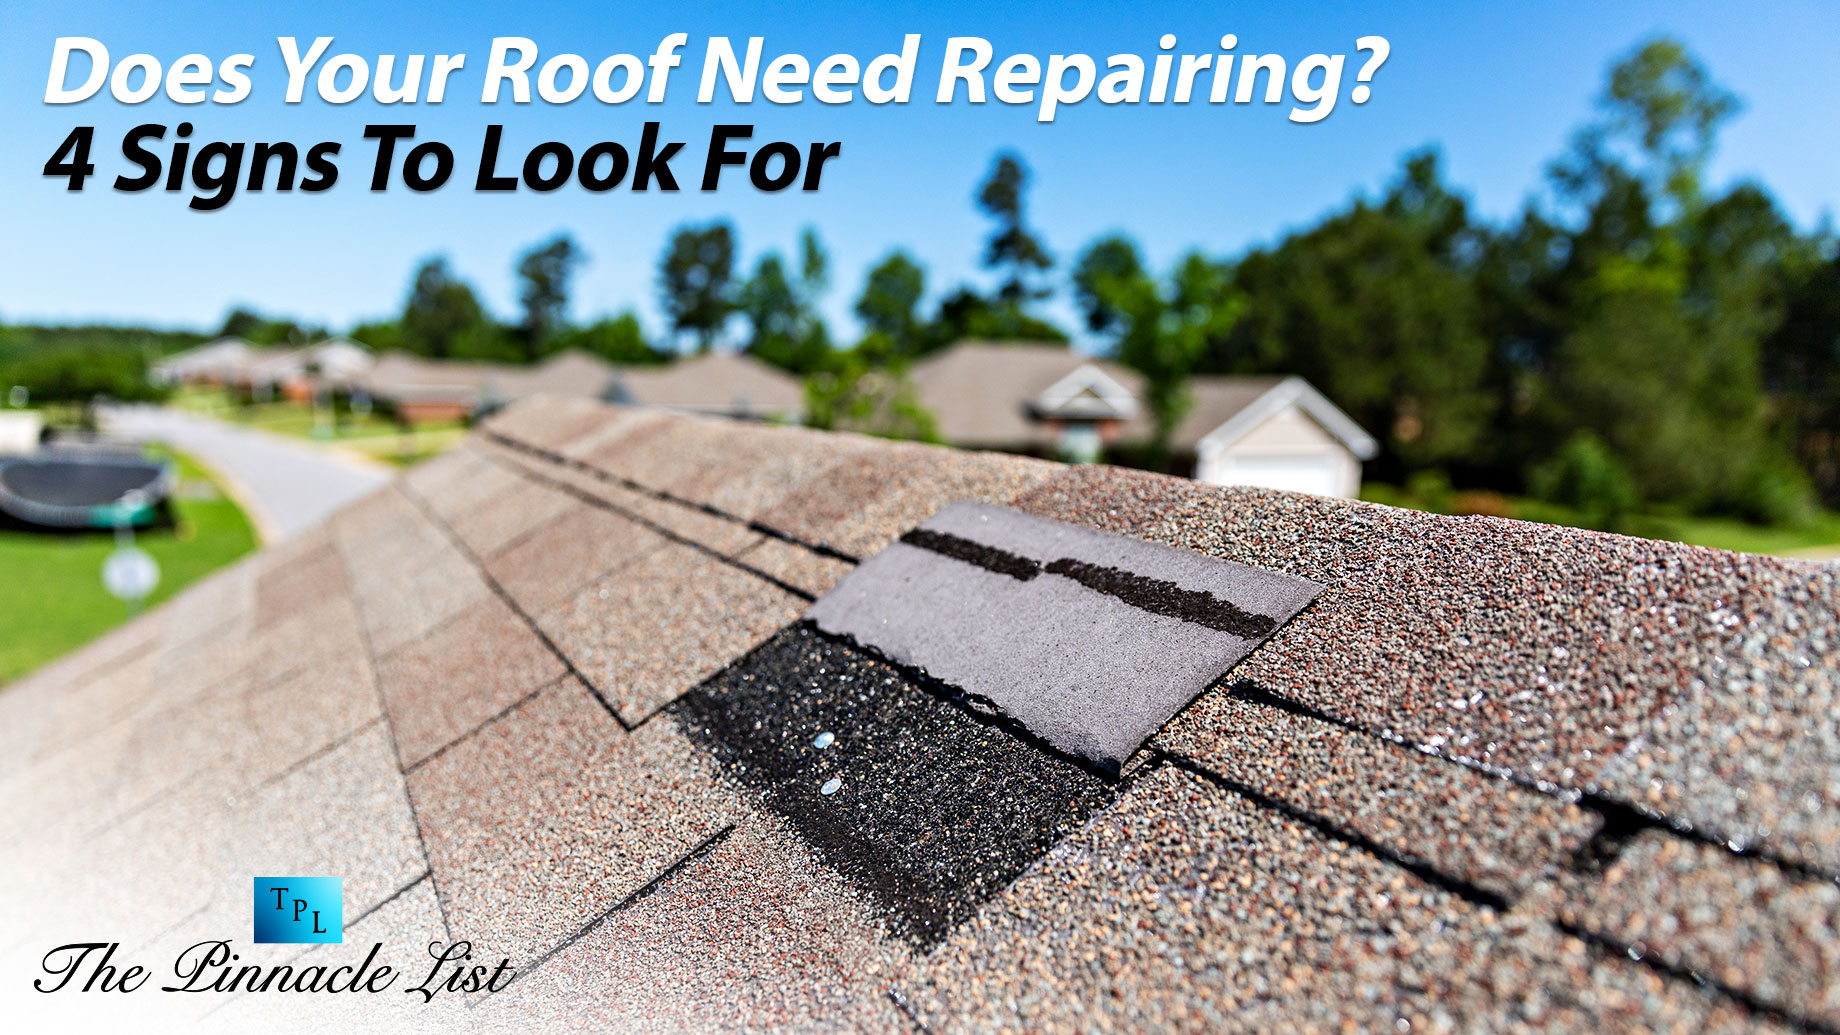 Does Your Roof Need Repairing? 4 Signs To Look For